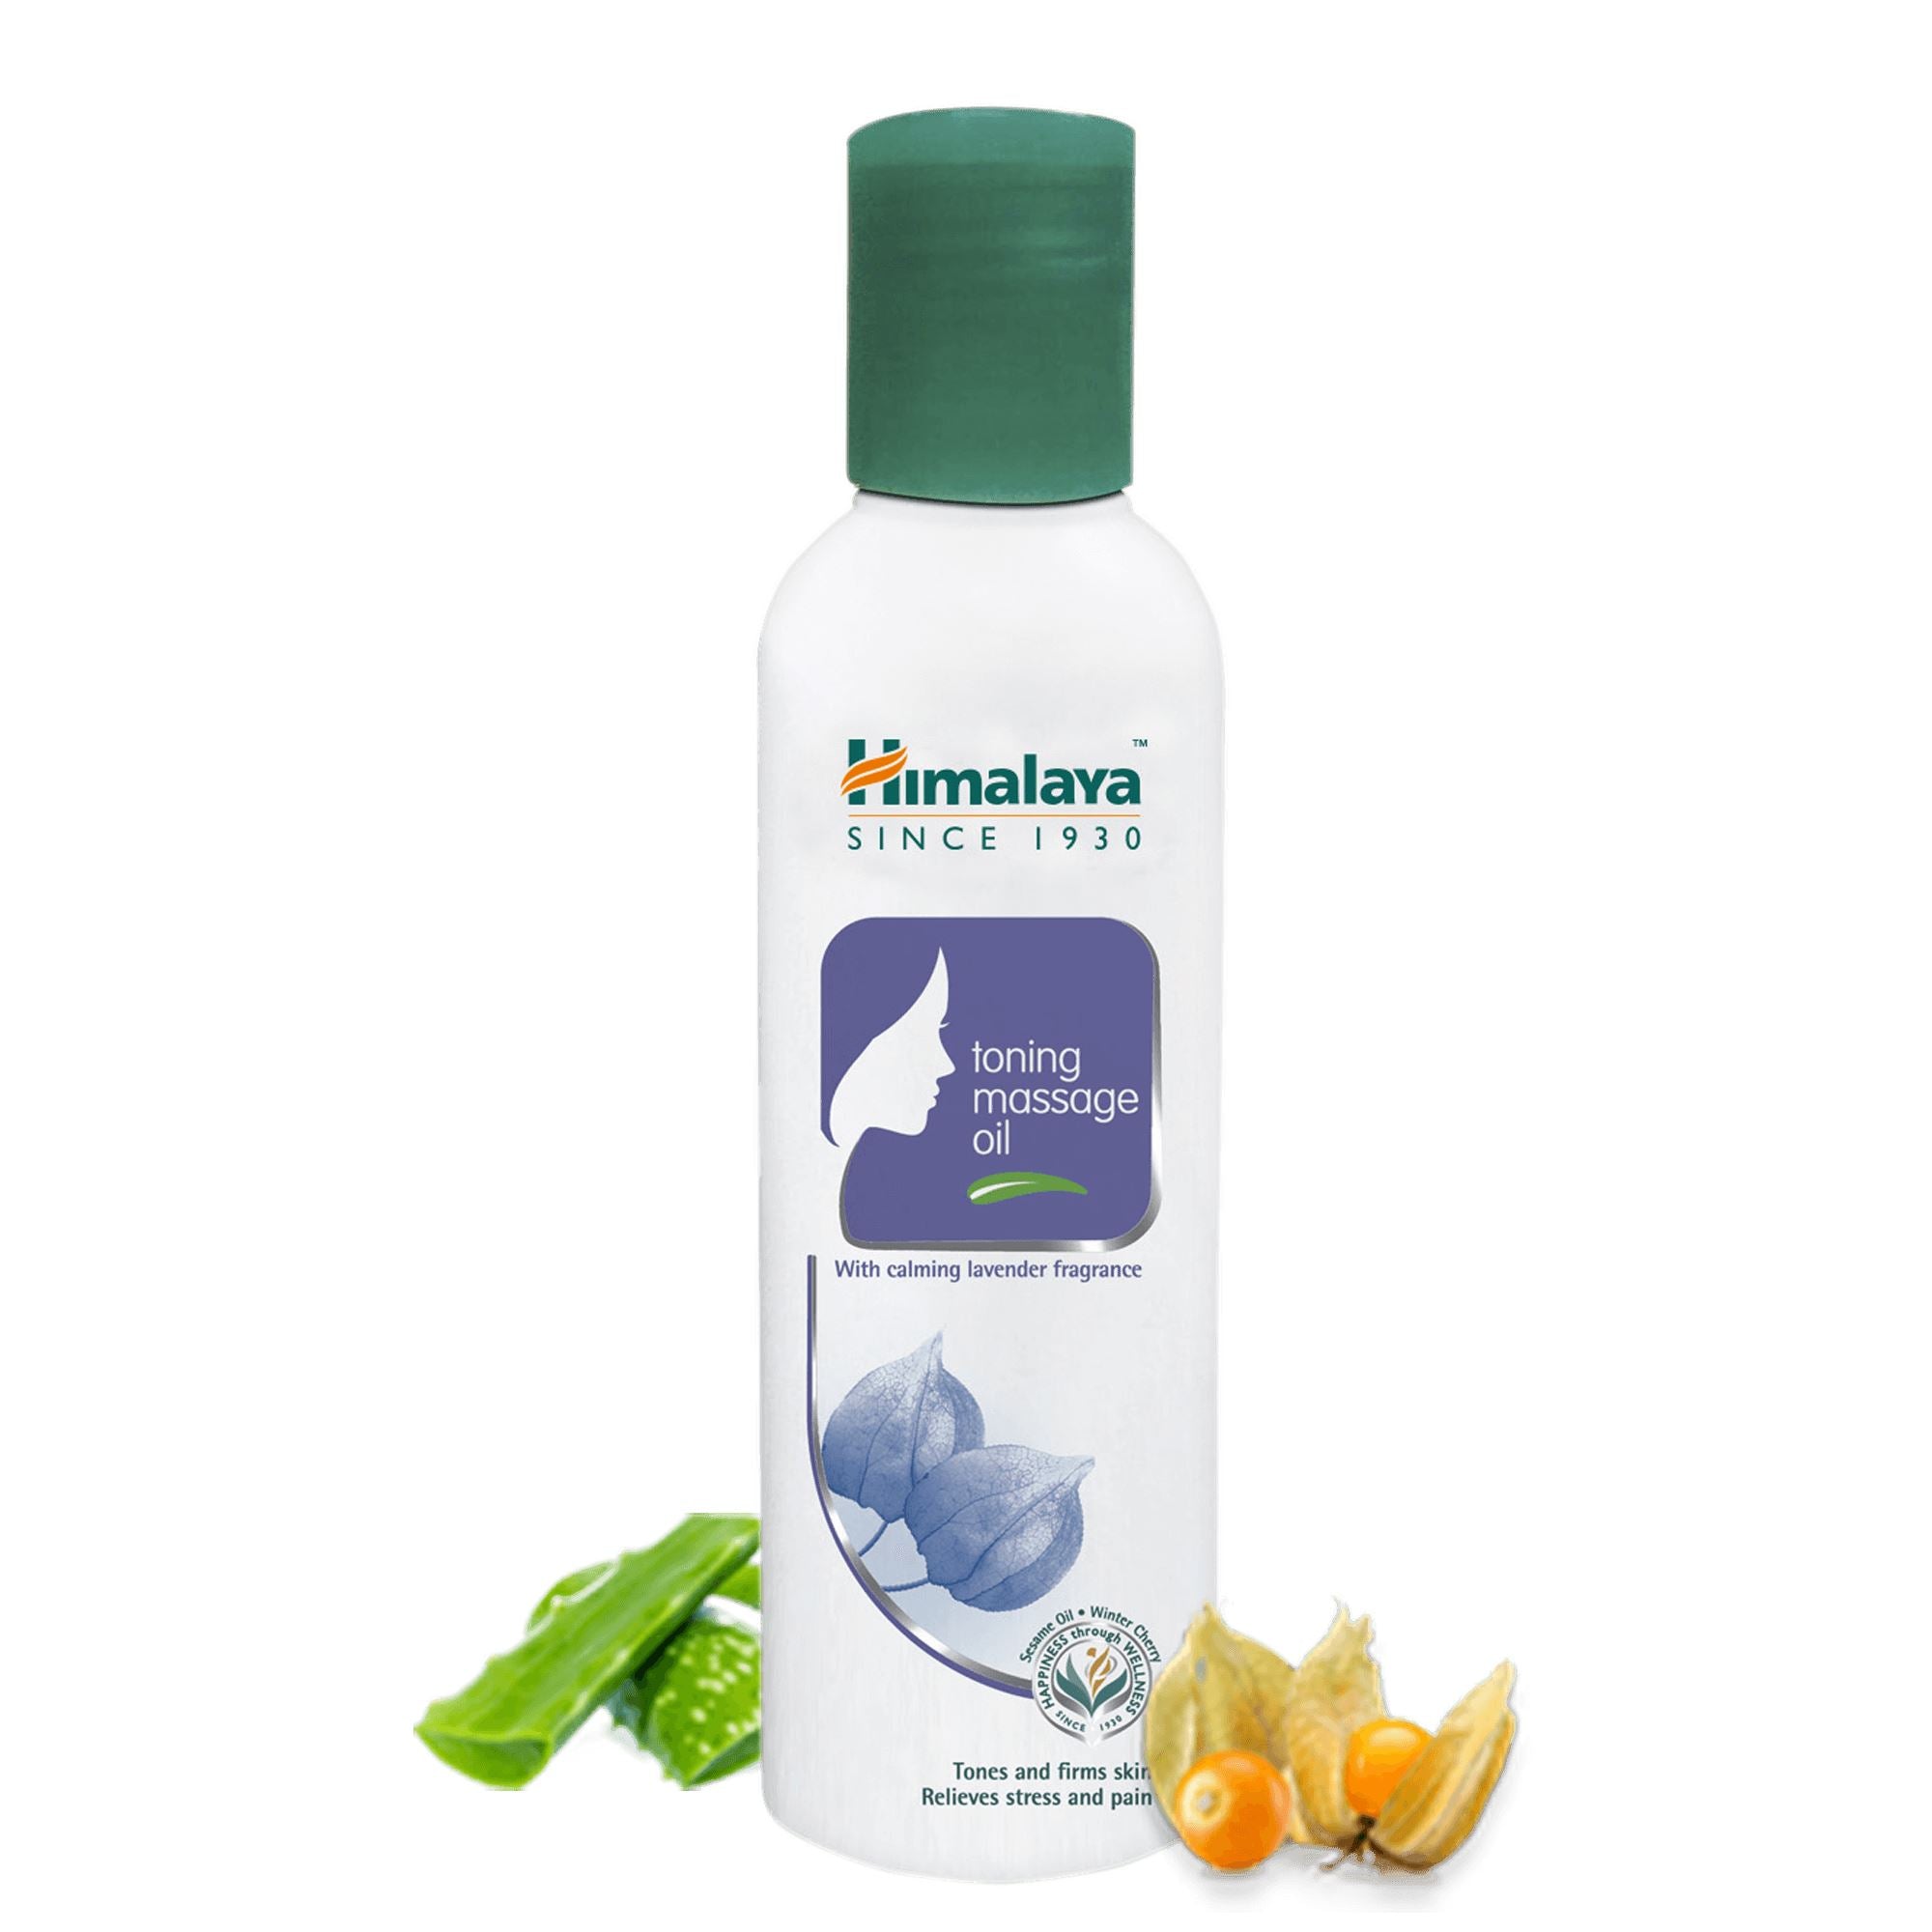 Himalaya Toning massage oil - Tones and firms skin, Relieves stress and pain